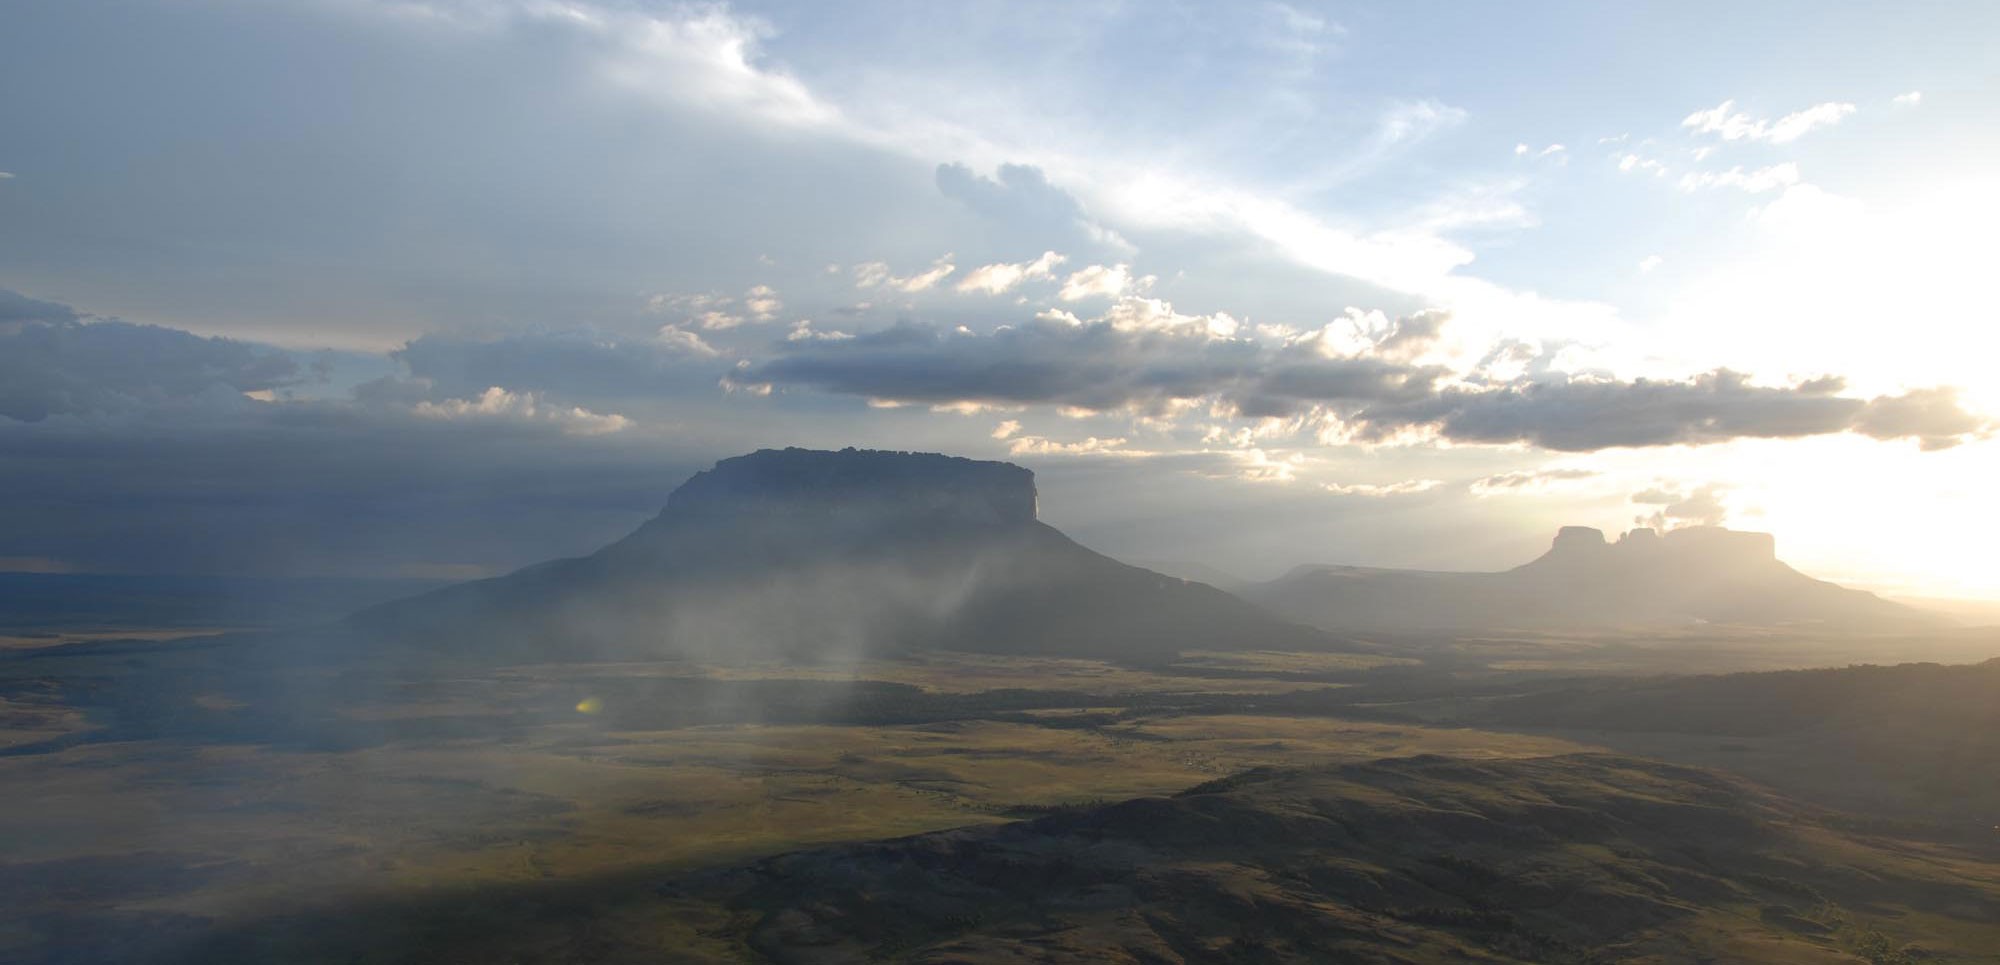 Upuigma Tepui, as seen by paramotor - first climbed by my friend Steve Backshall (with John Arran & Ivan Calderon) in 2007